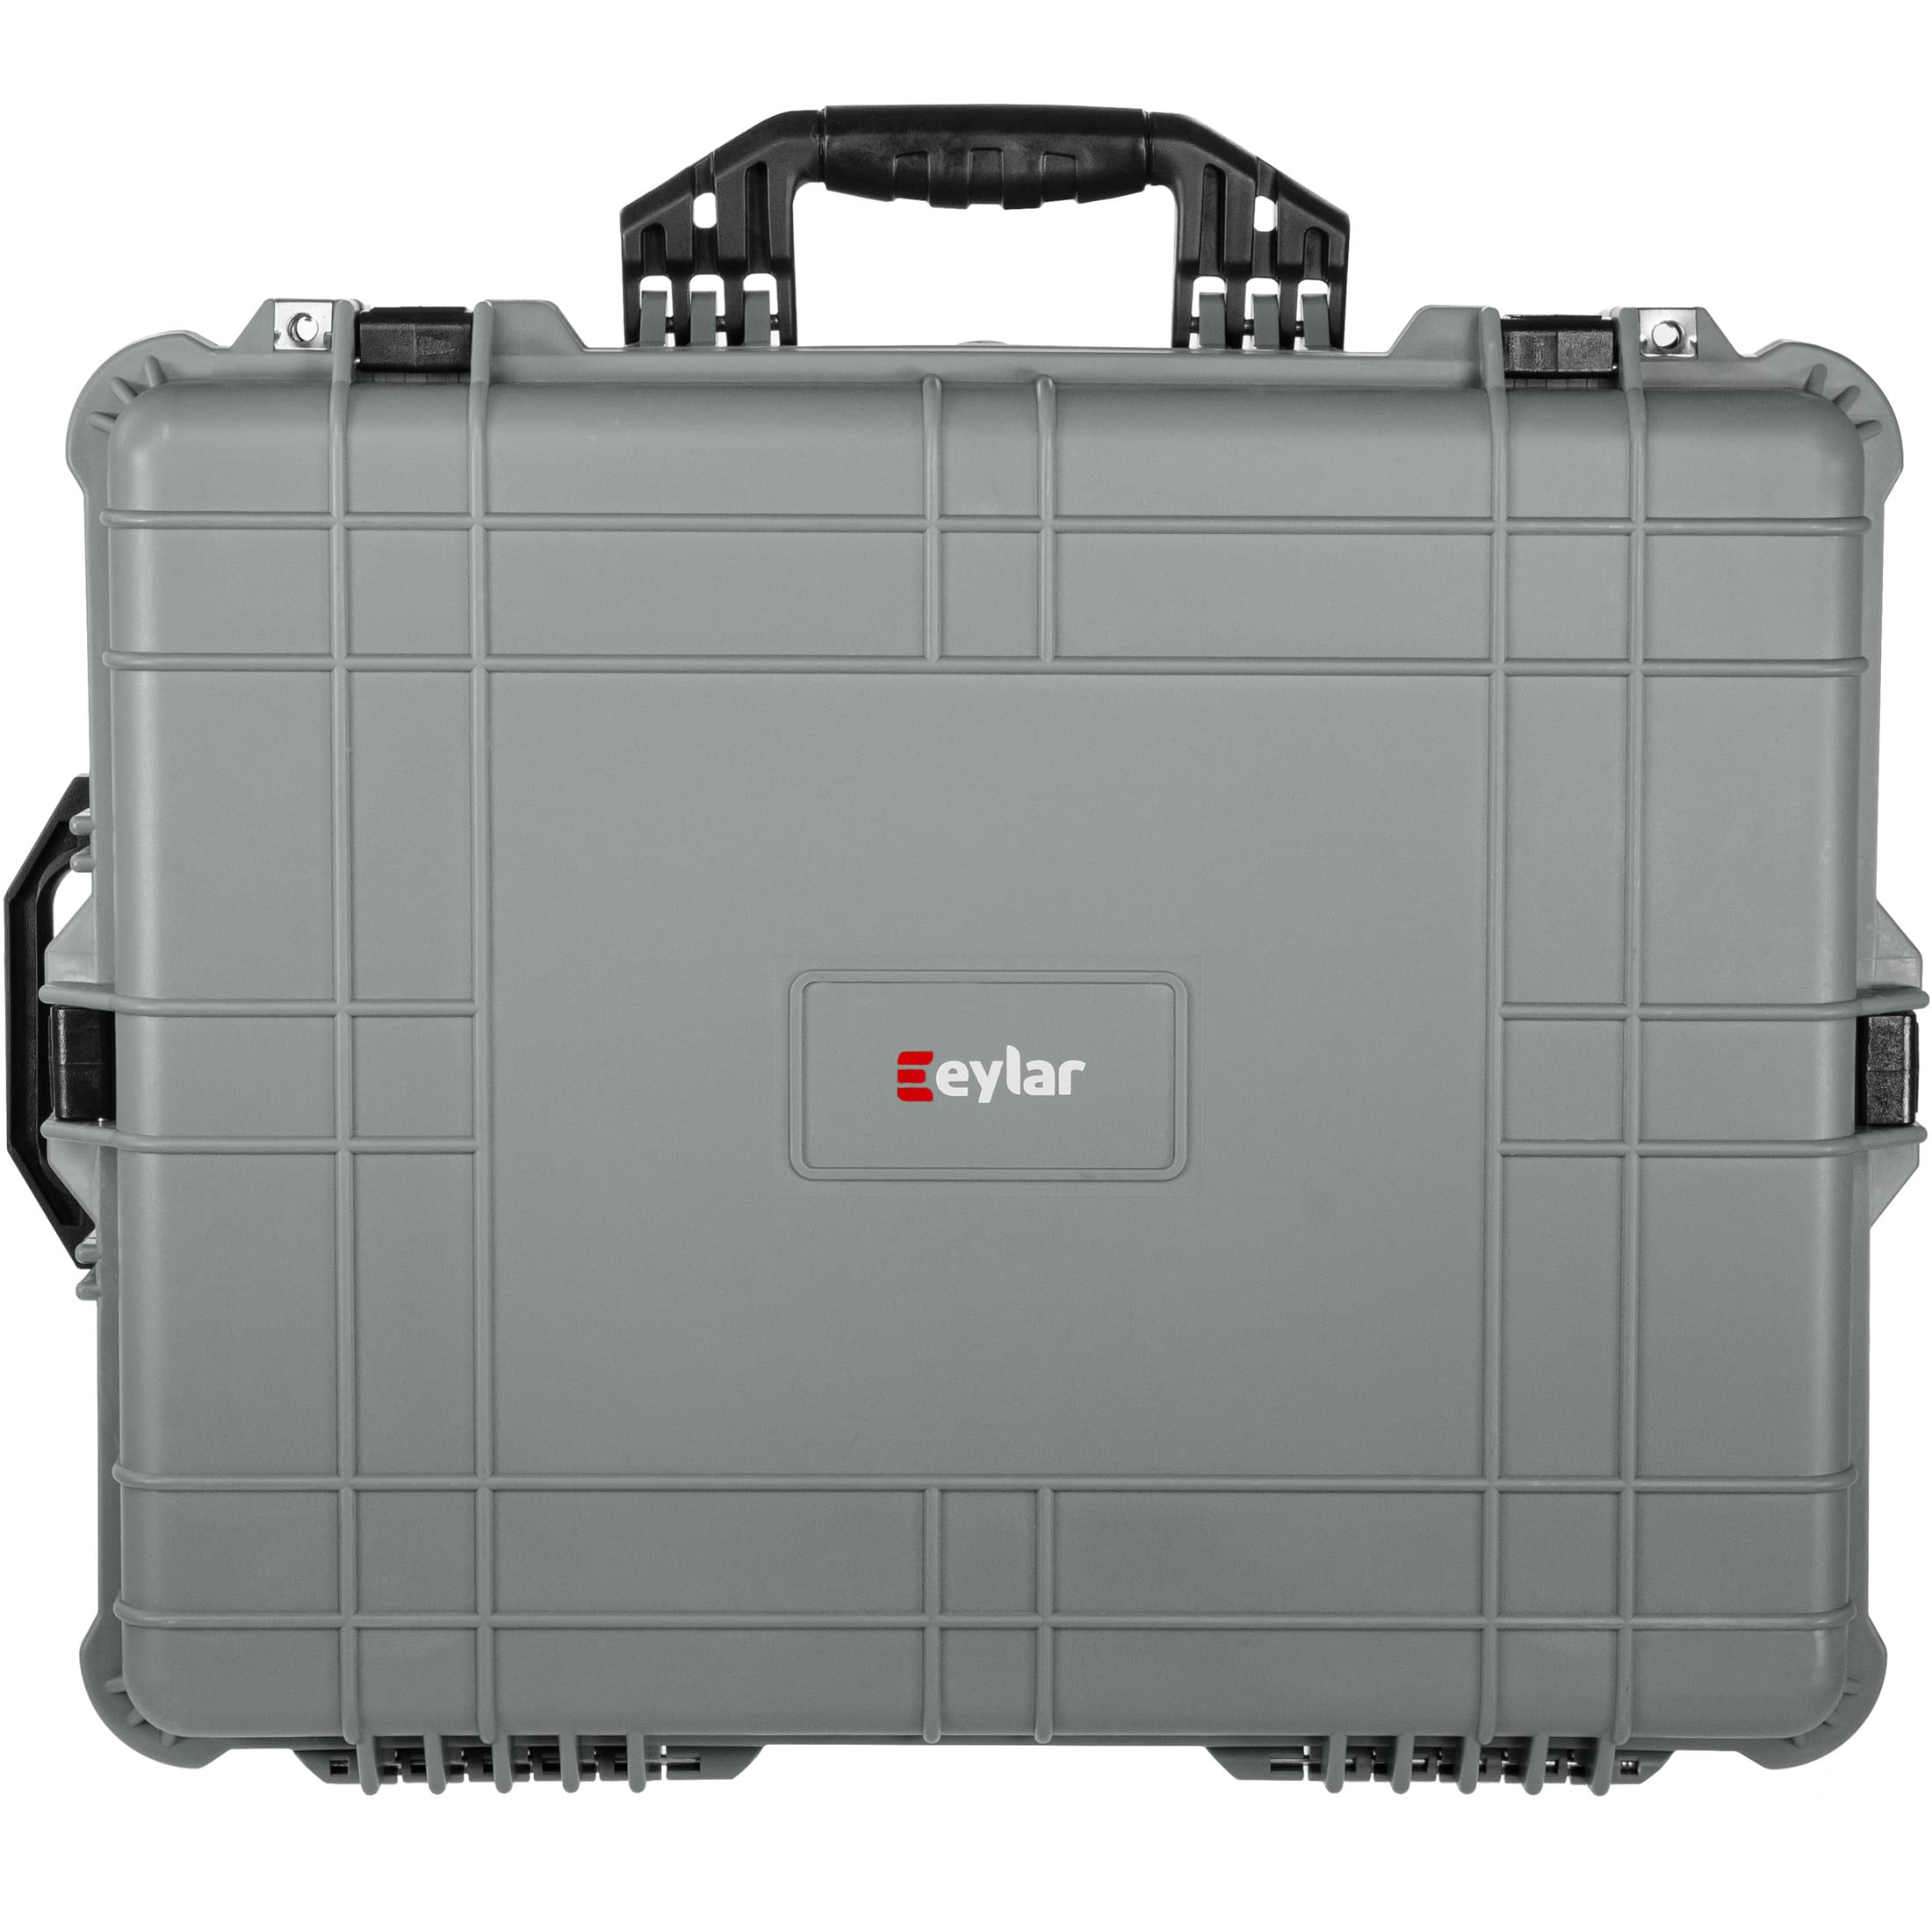 Eylar Extra Large 24 Inch Protective Hard Camera Case, Gear, Equipment, Devices, Monitor Case Waterproof with Foam TSA Standards Gray